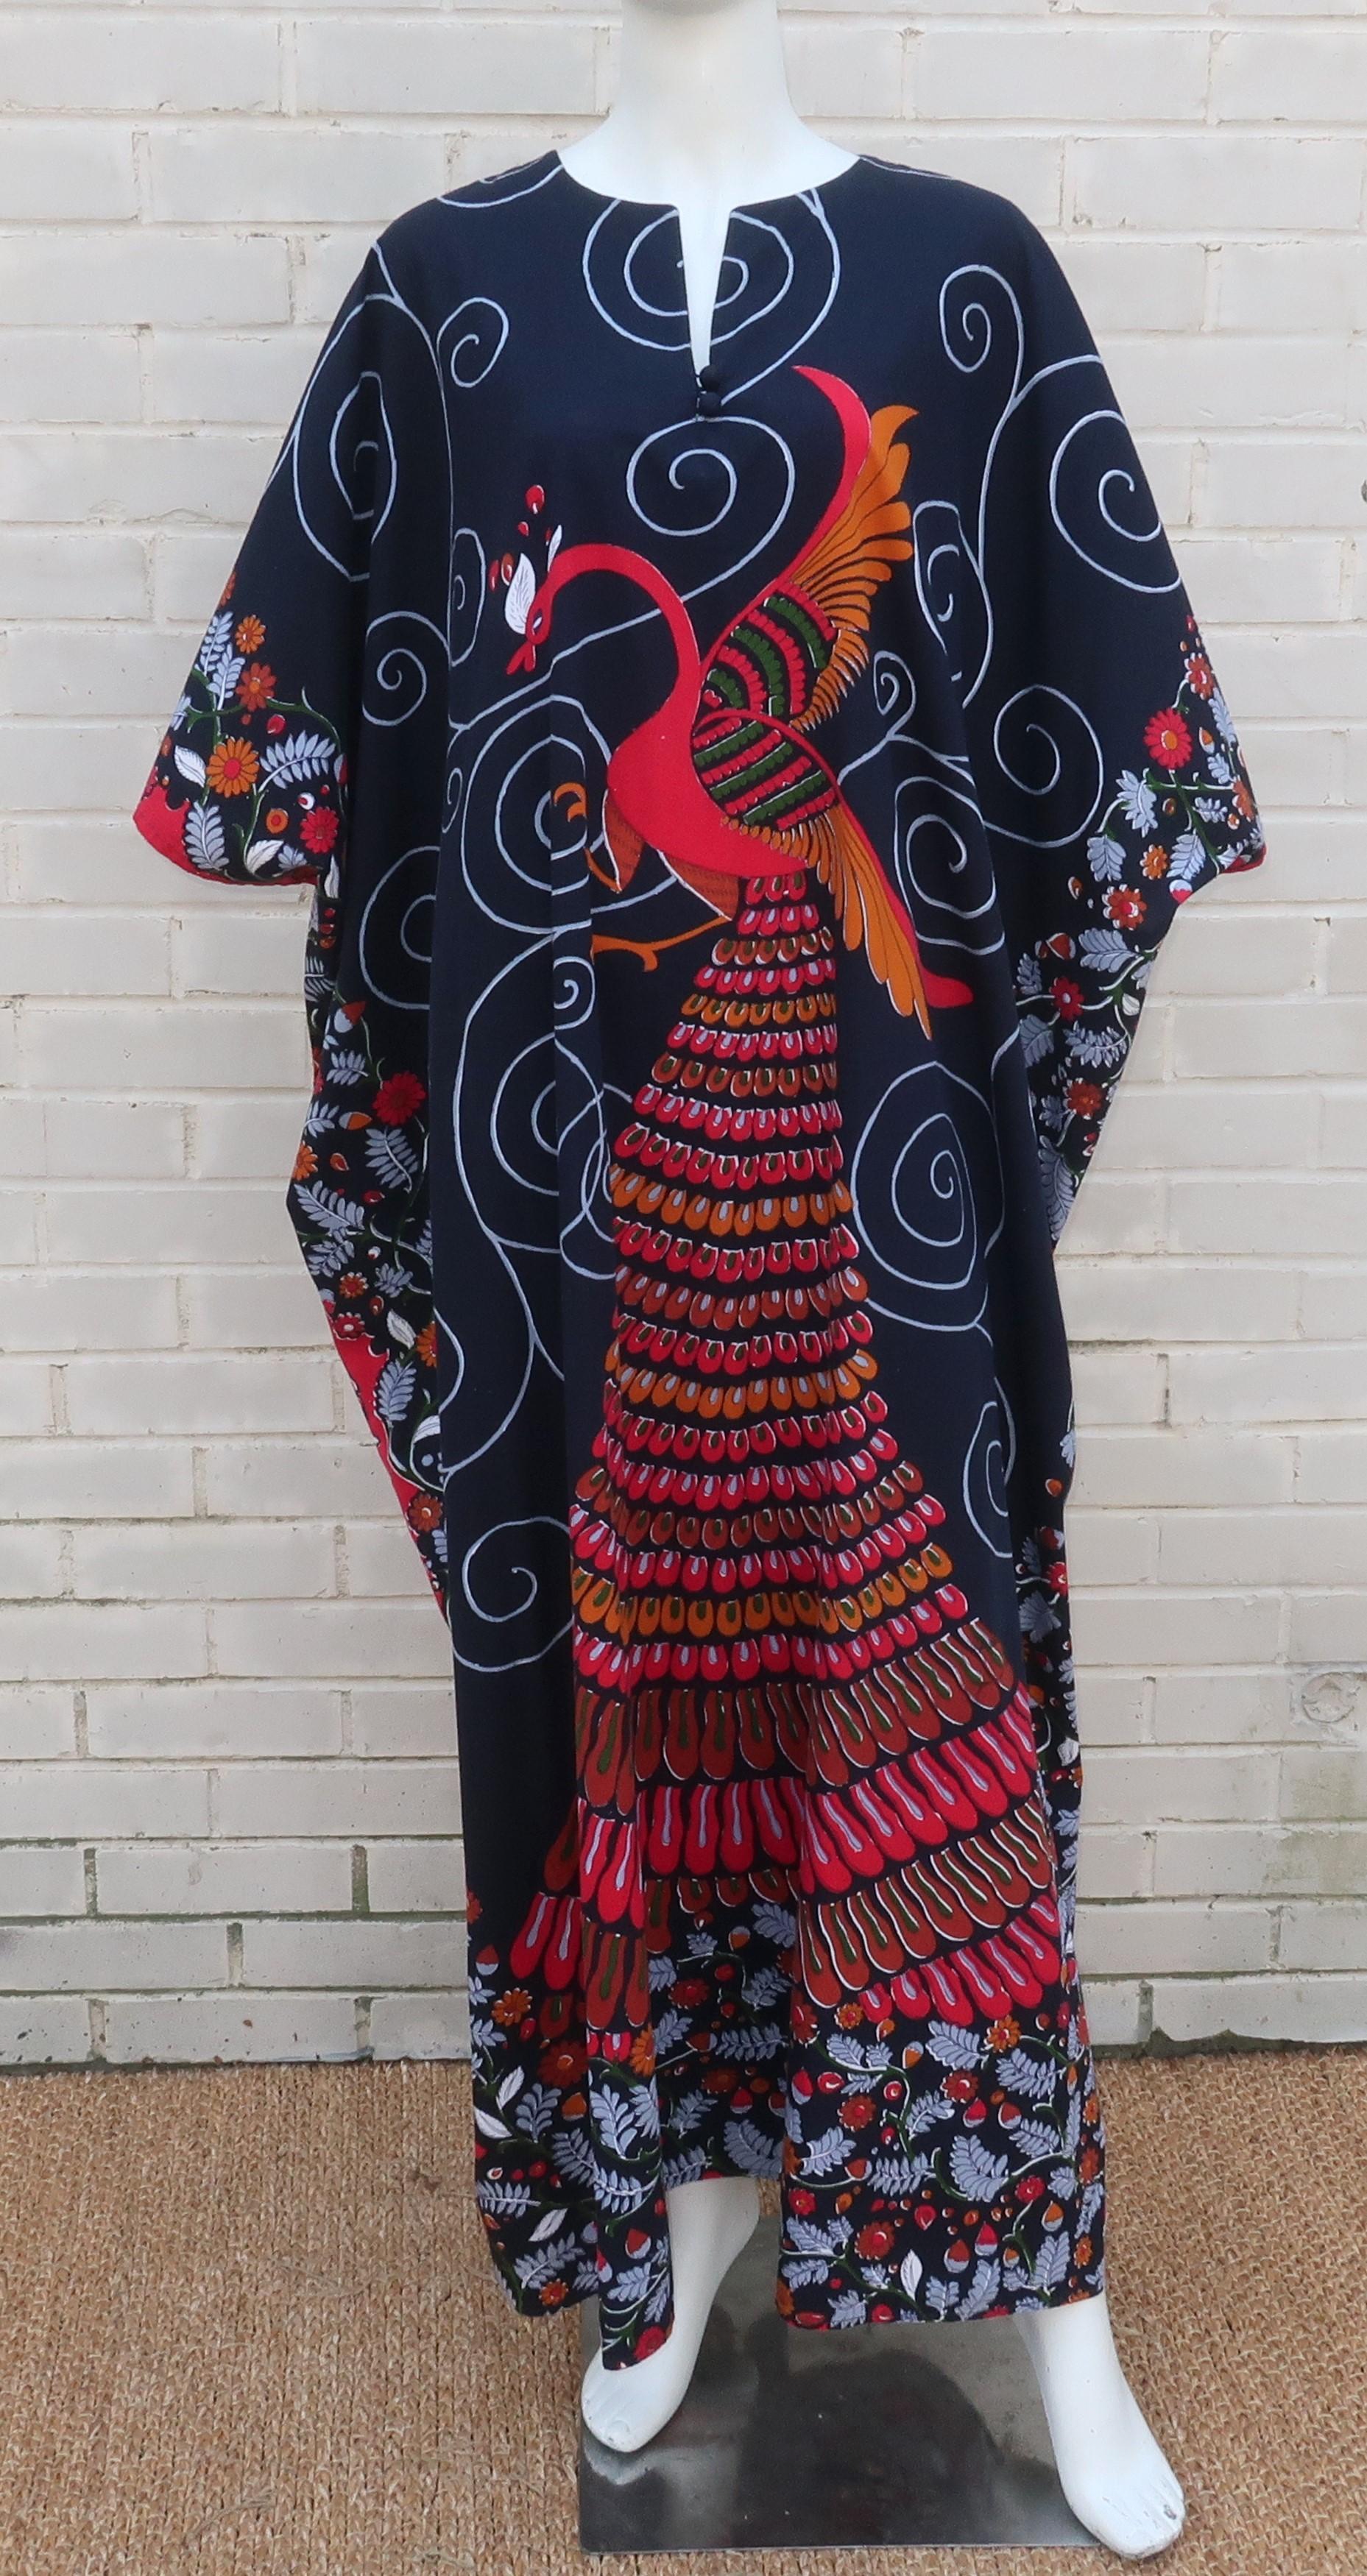 C.1980 cotton caftan lounger dress with an exotic peacock print in shades of red, cognac brown, gray and green with touches of white highlights and a near black background.  The pullover construction has a collarless neckline and two fabric covered